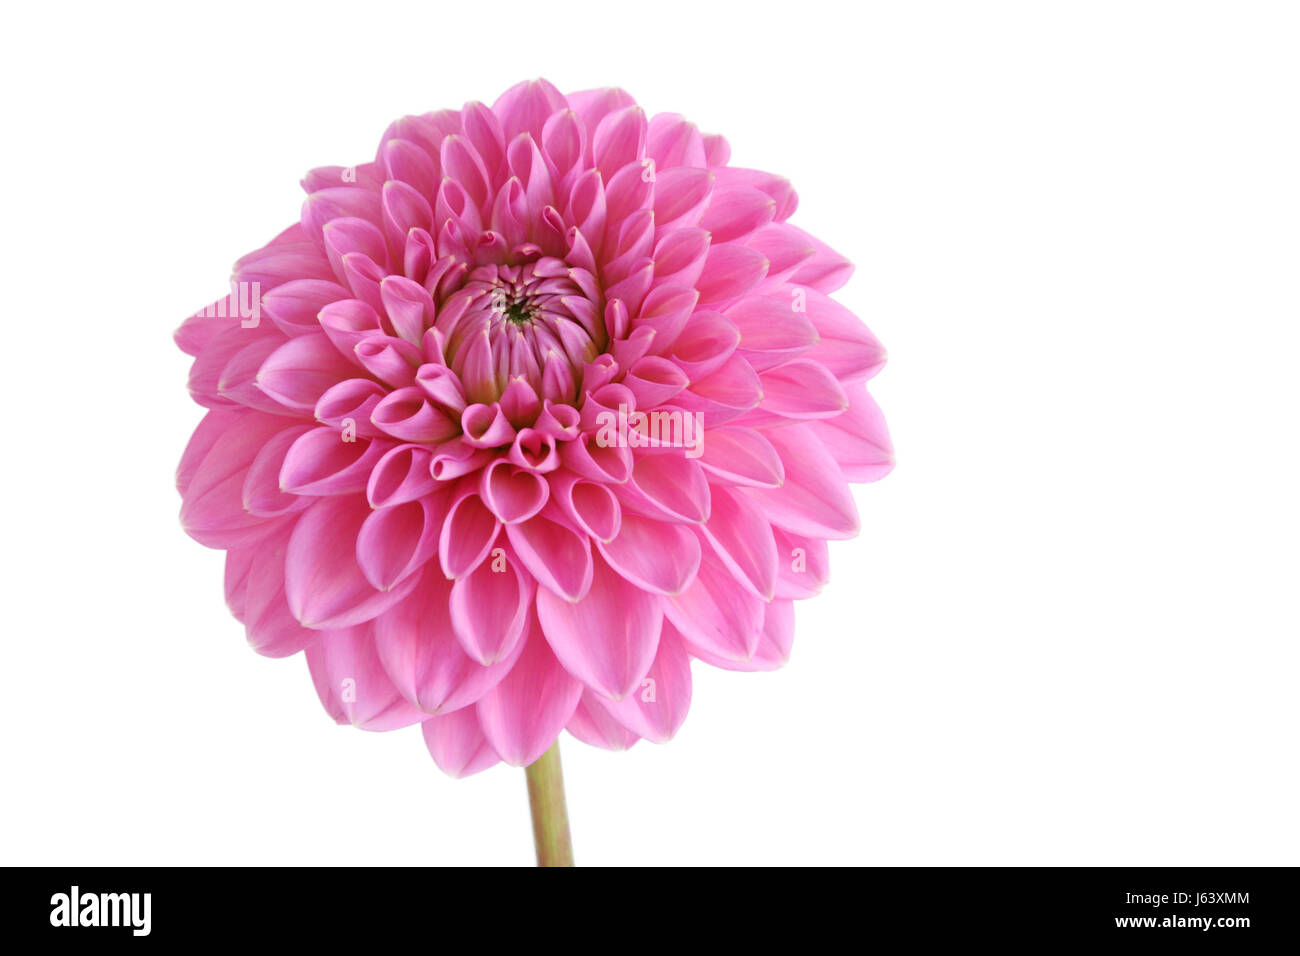 isolated flower plant dahlia cutting flower pink glass chalice tumbler leaf Stock Photo